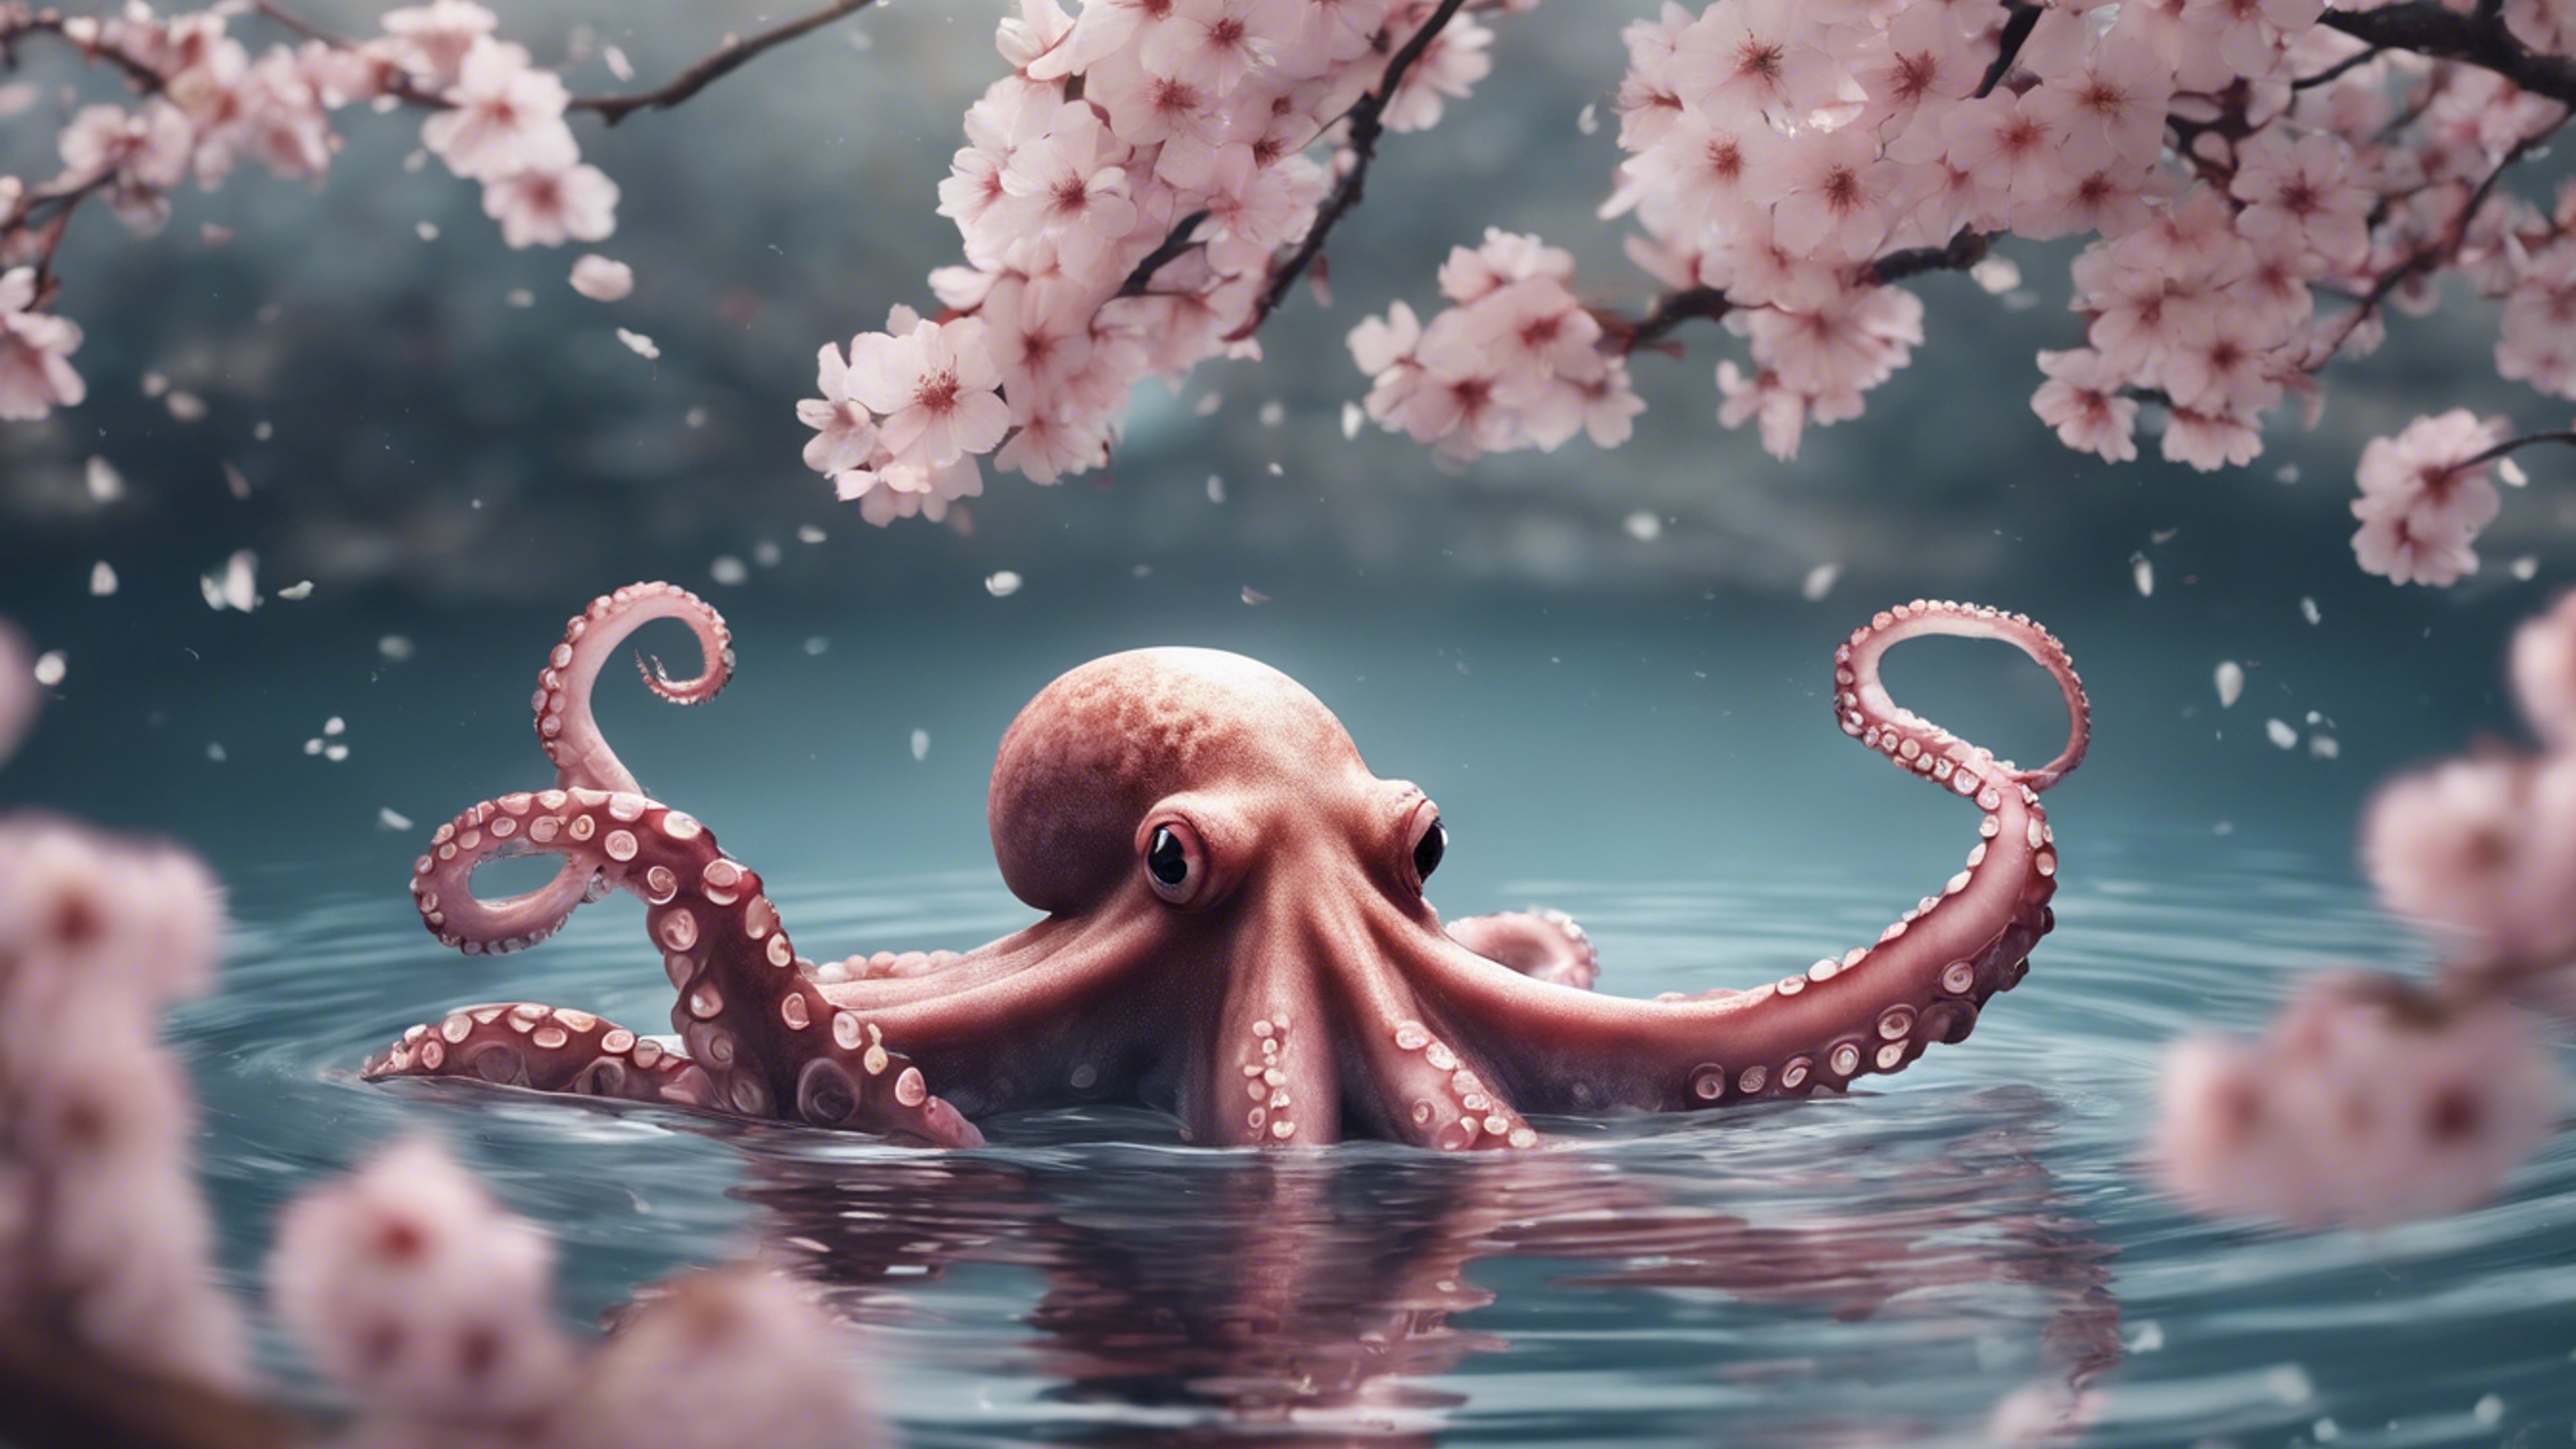 A sketch of an octopus floating peacefully in the water, with Japanese cherry blossoms gracefully falling around. 墙纸[a4f14d80ca6f4b538d98]